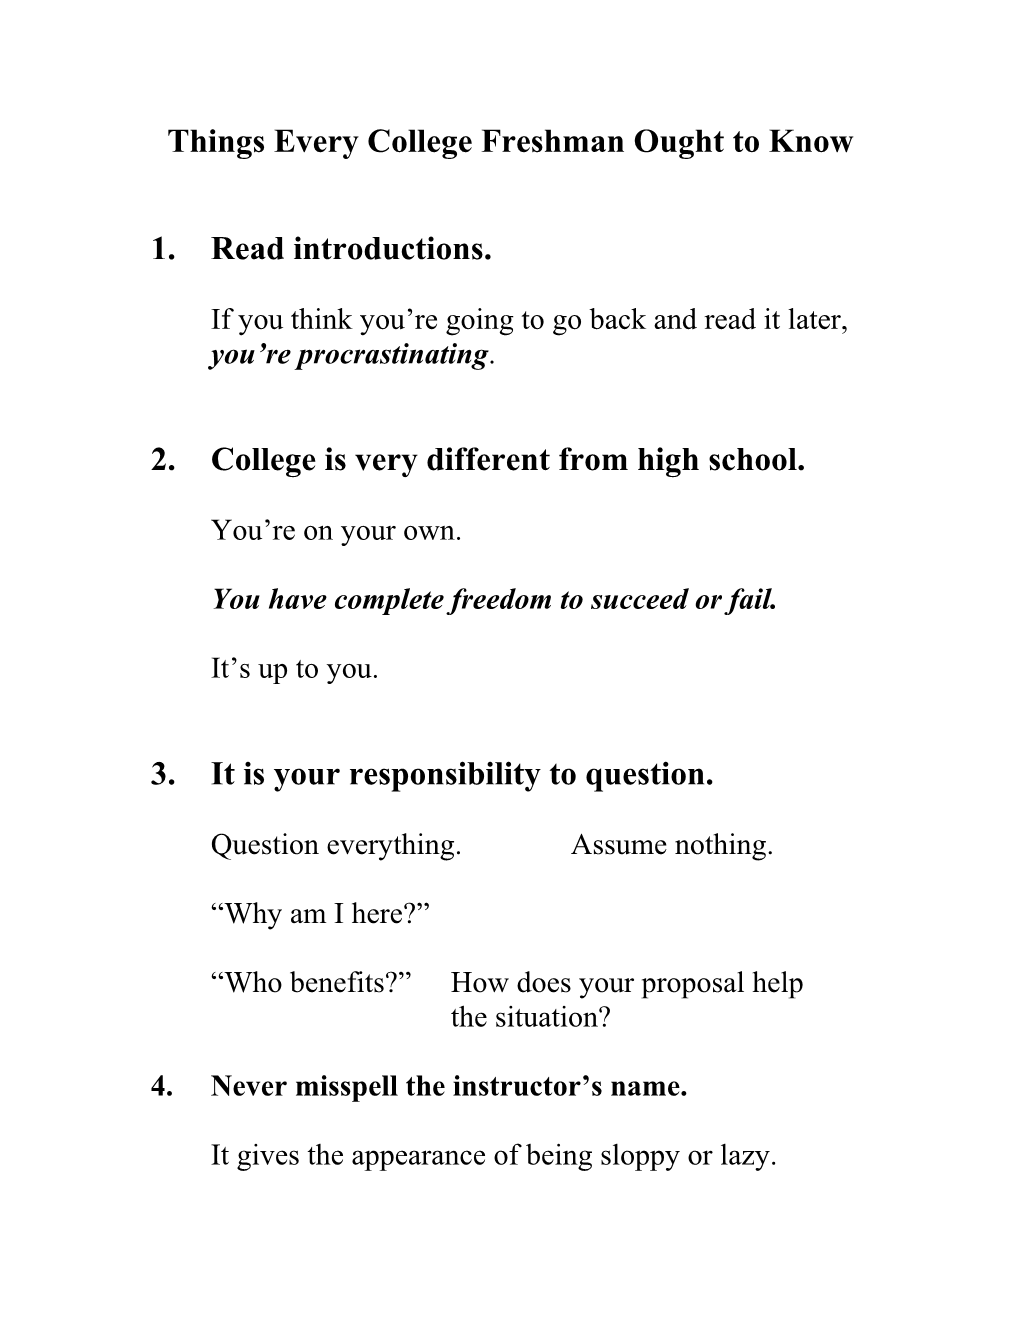 Things Every College Freshman Ought to Know